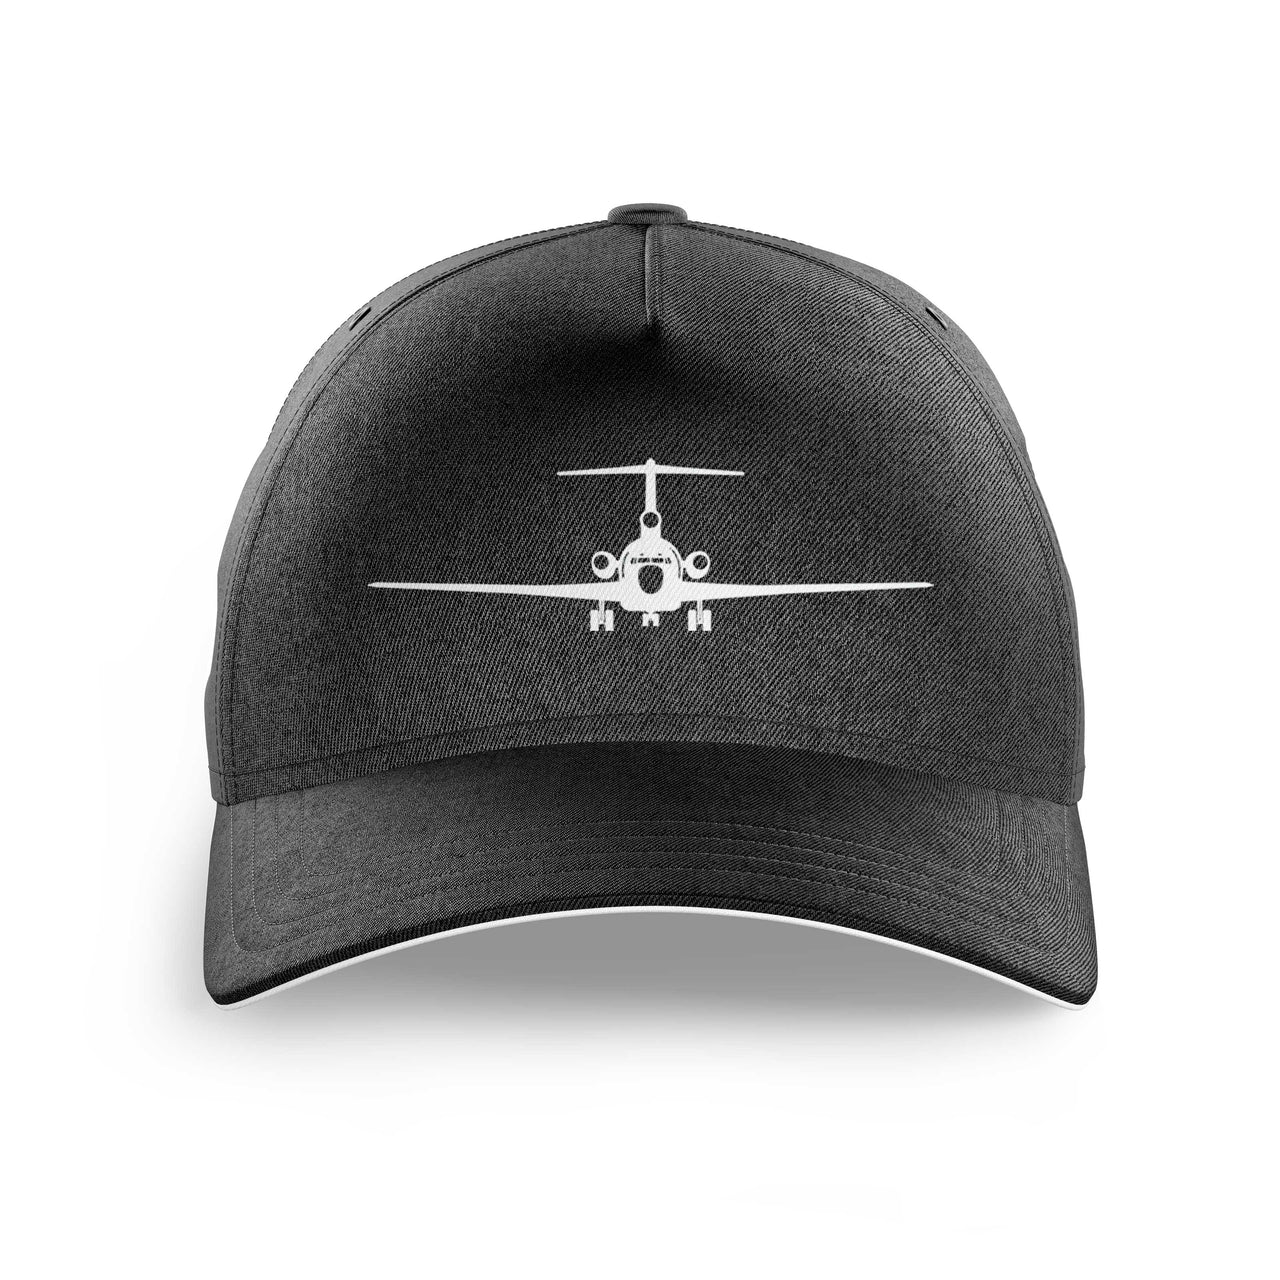 Boeing 727 Silhouette Printed Hats